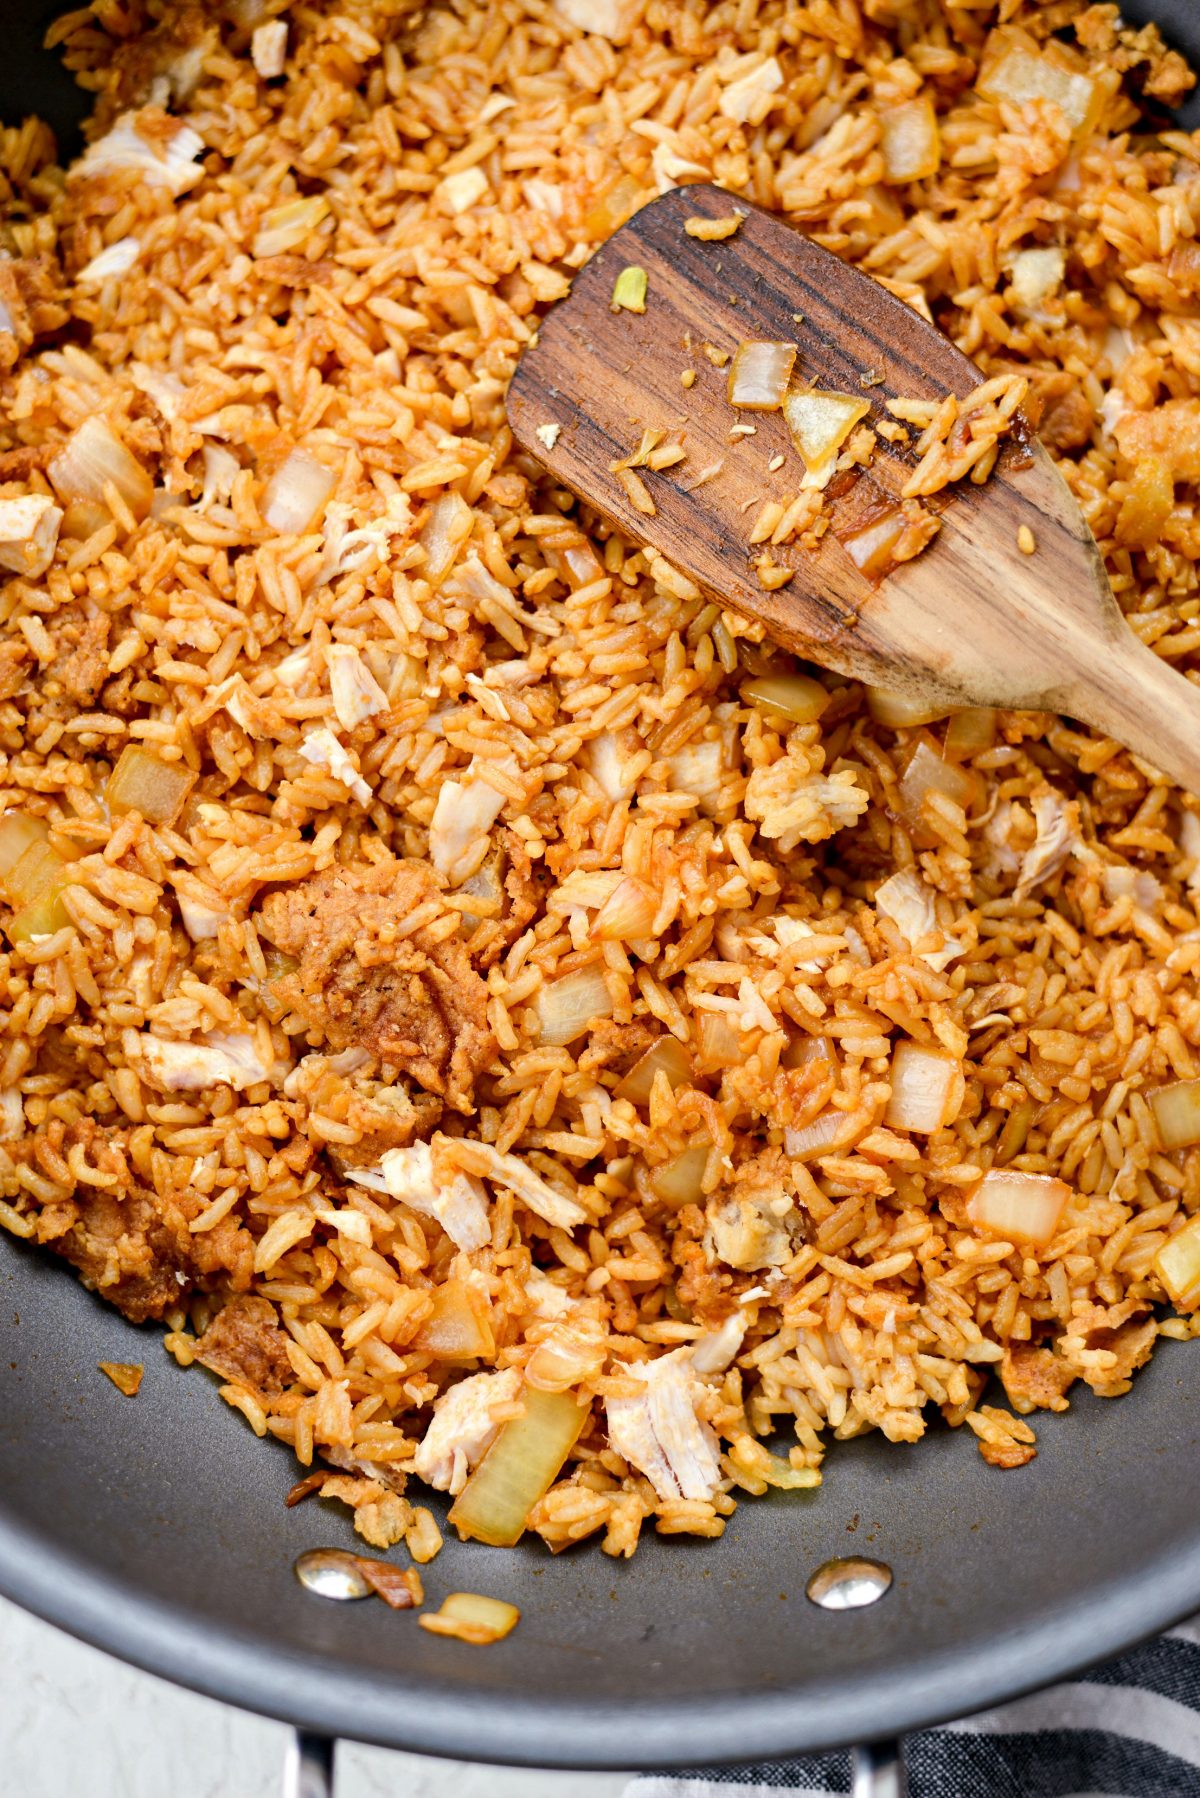 flatten and press the fried rice into the pan.